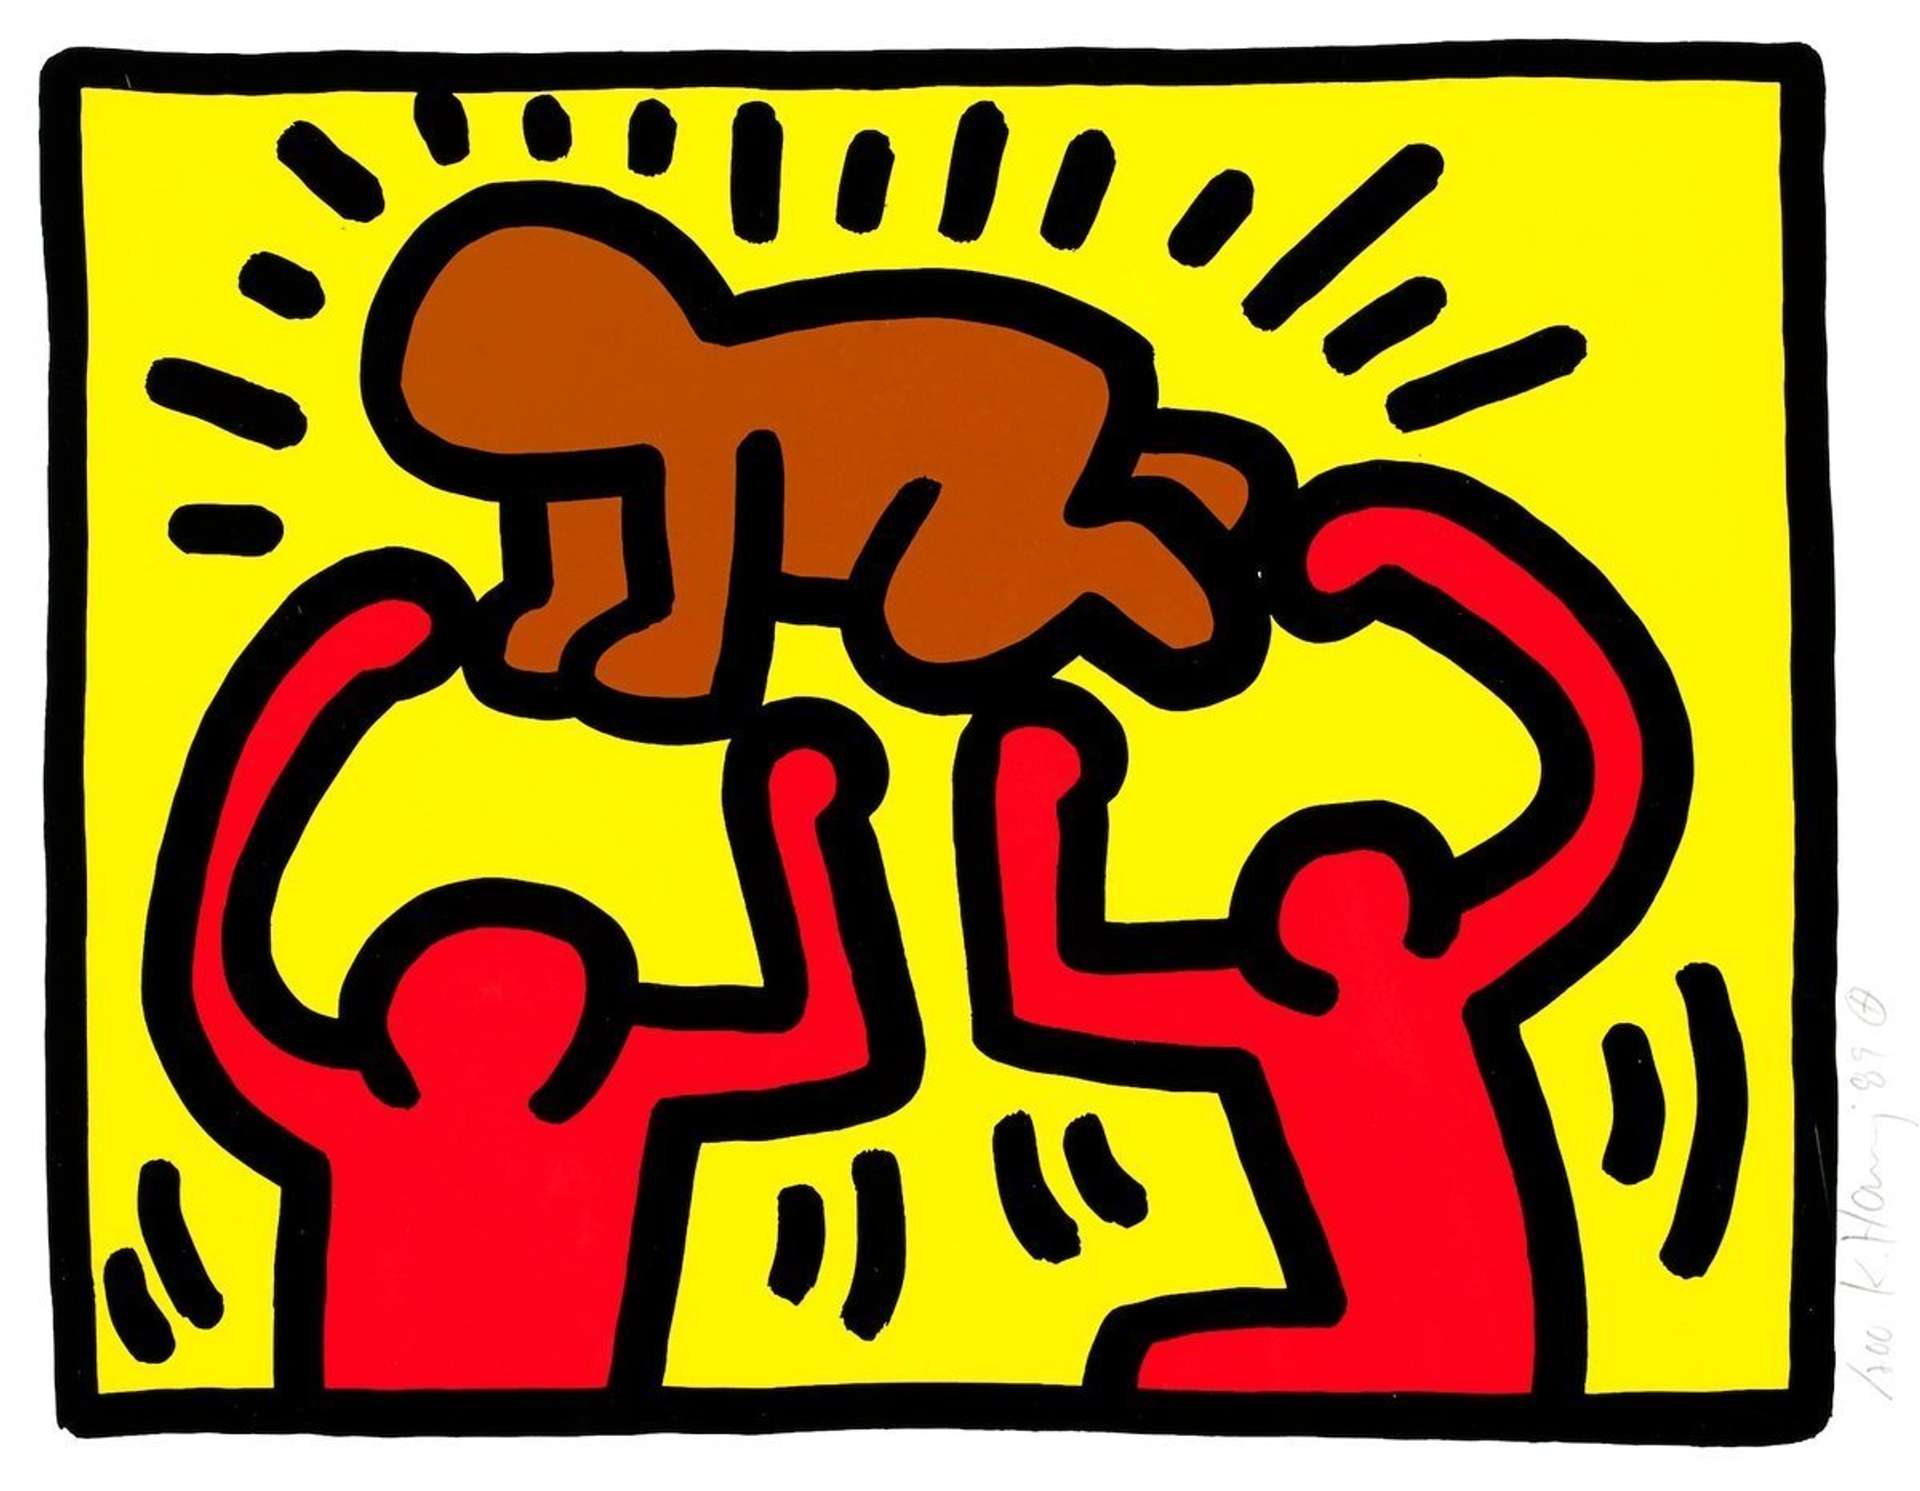 Pop Shop IV, Plate III by Keith Haring